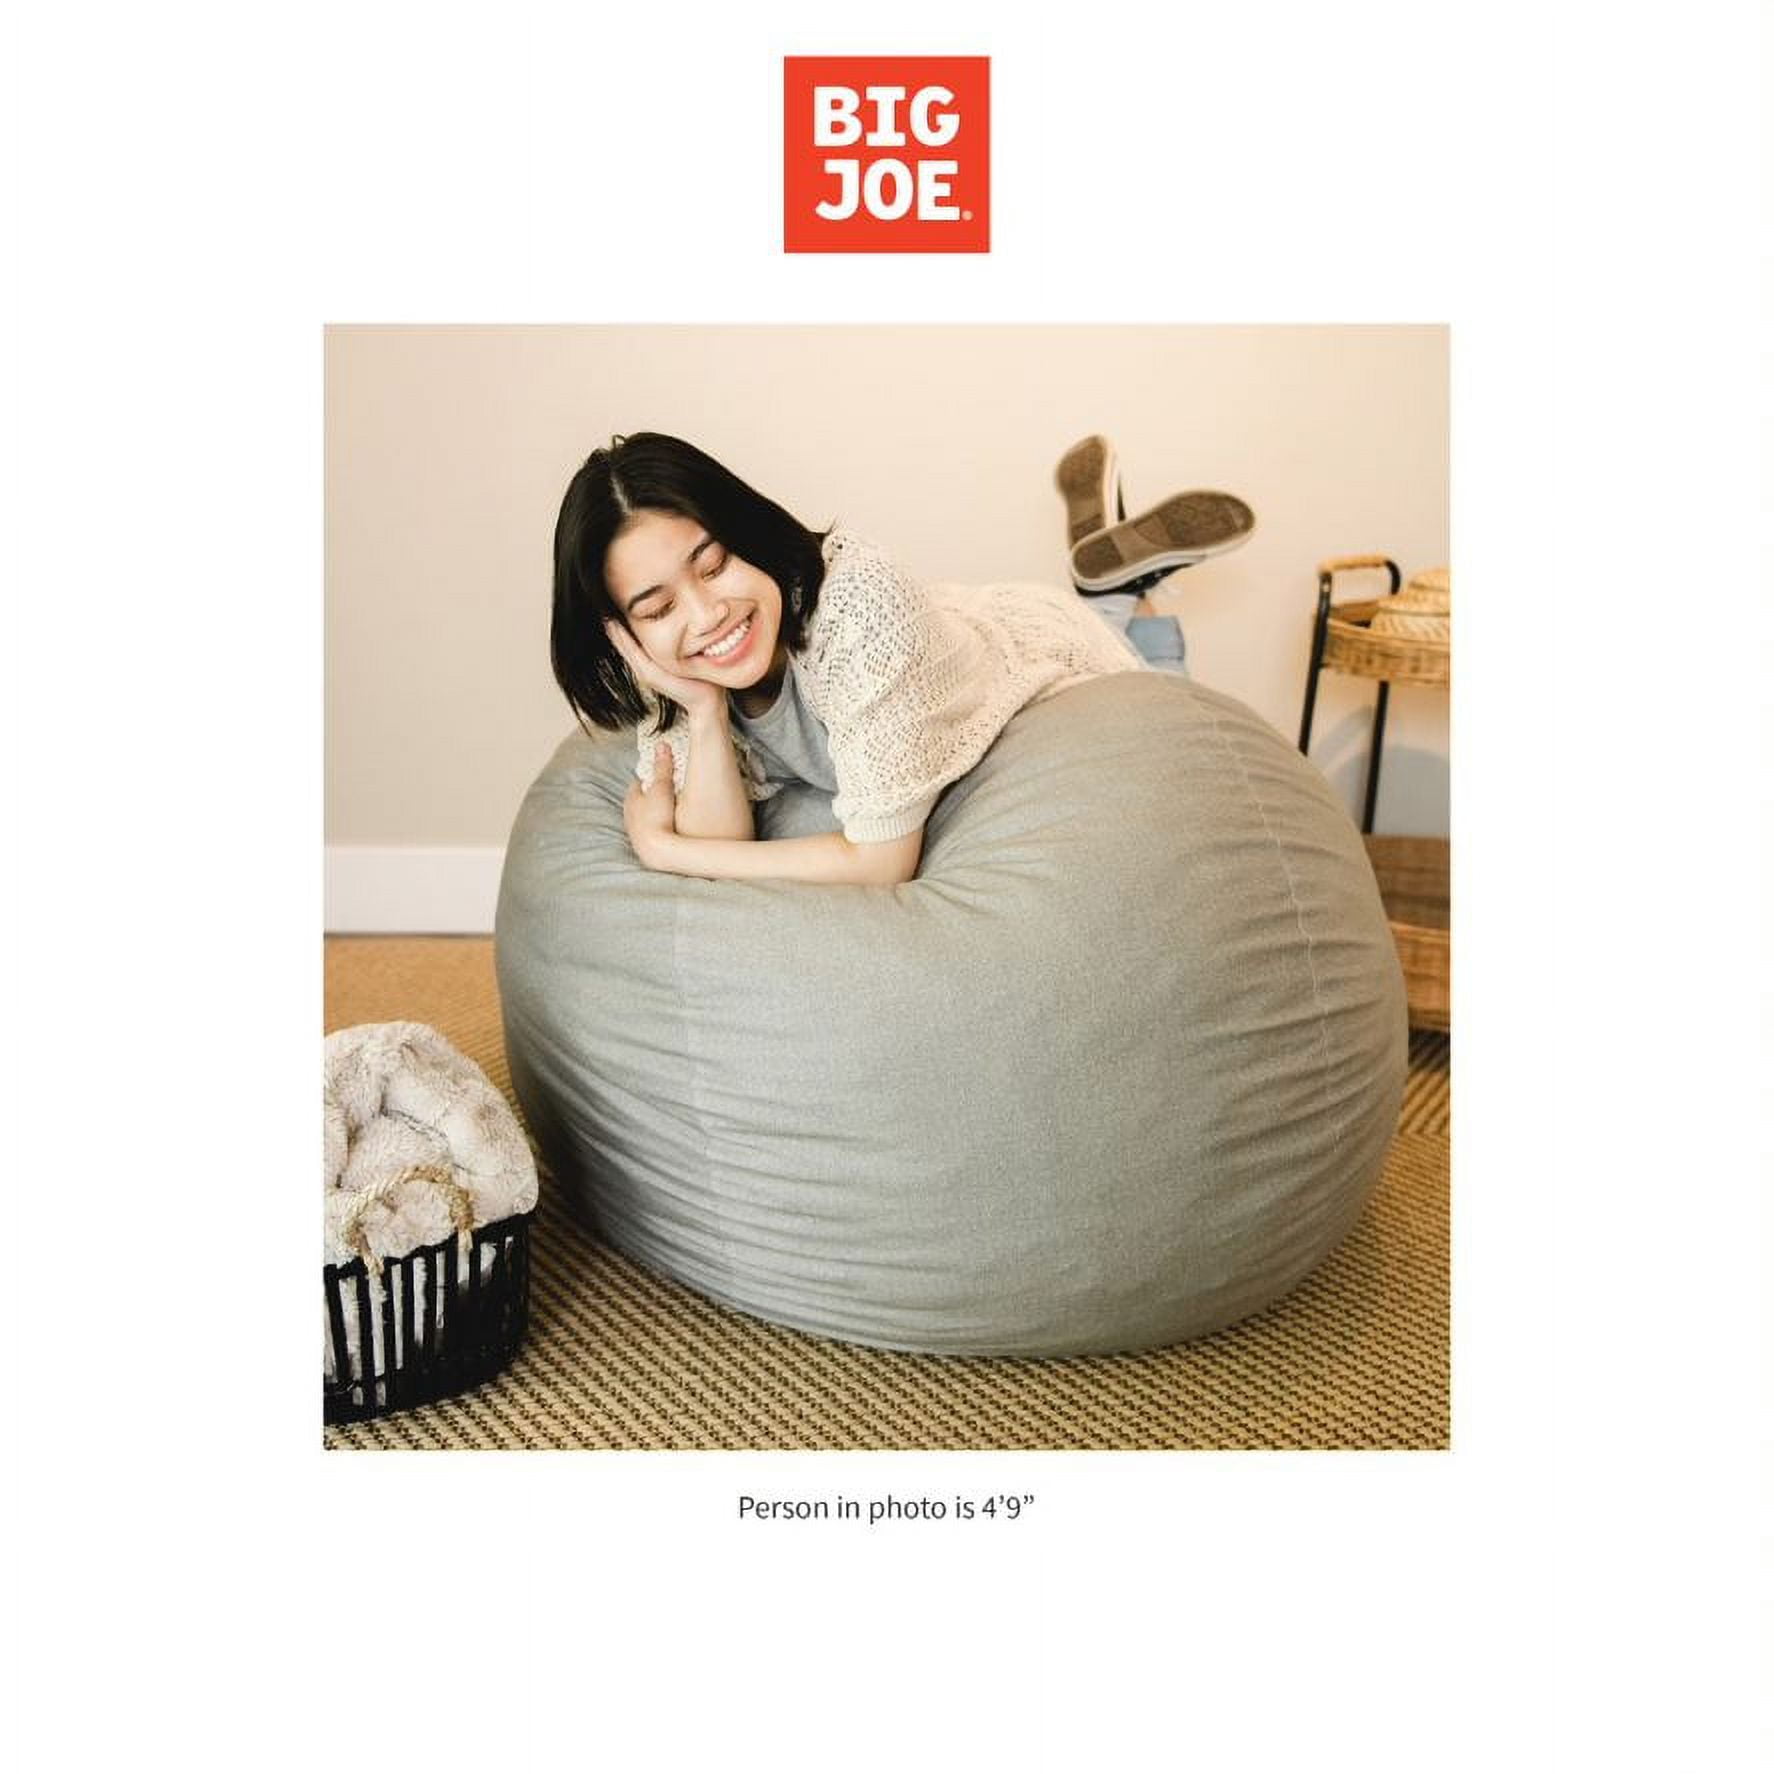  HDMLDP 7FT Bean Bag Chairs for Adults Kids Soft Fluffy Big Joe  Bean Bag Chair Without Filling Round Sofa Reading Chairs for Bedroom Living  Room Decor, Khaki : Home & Kitchen